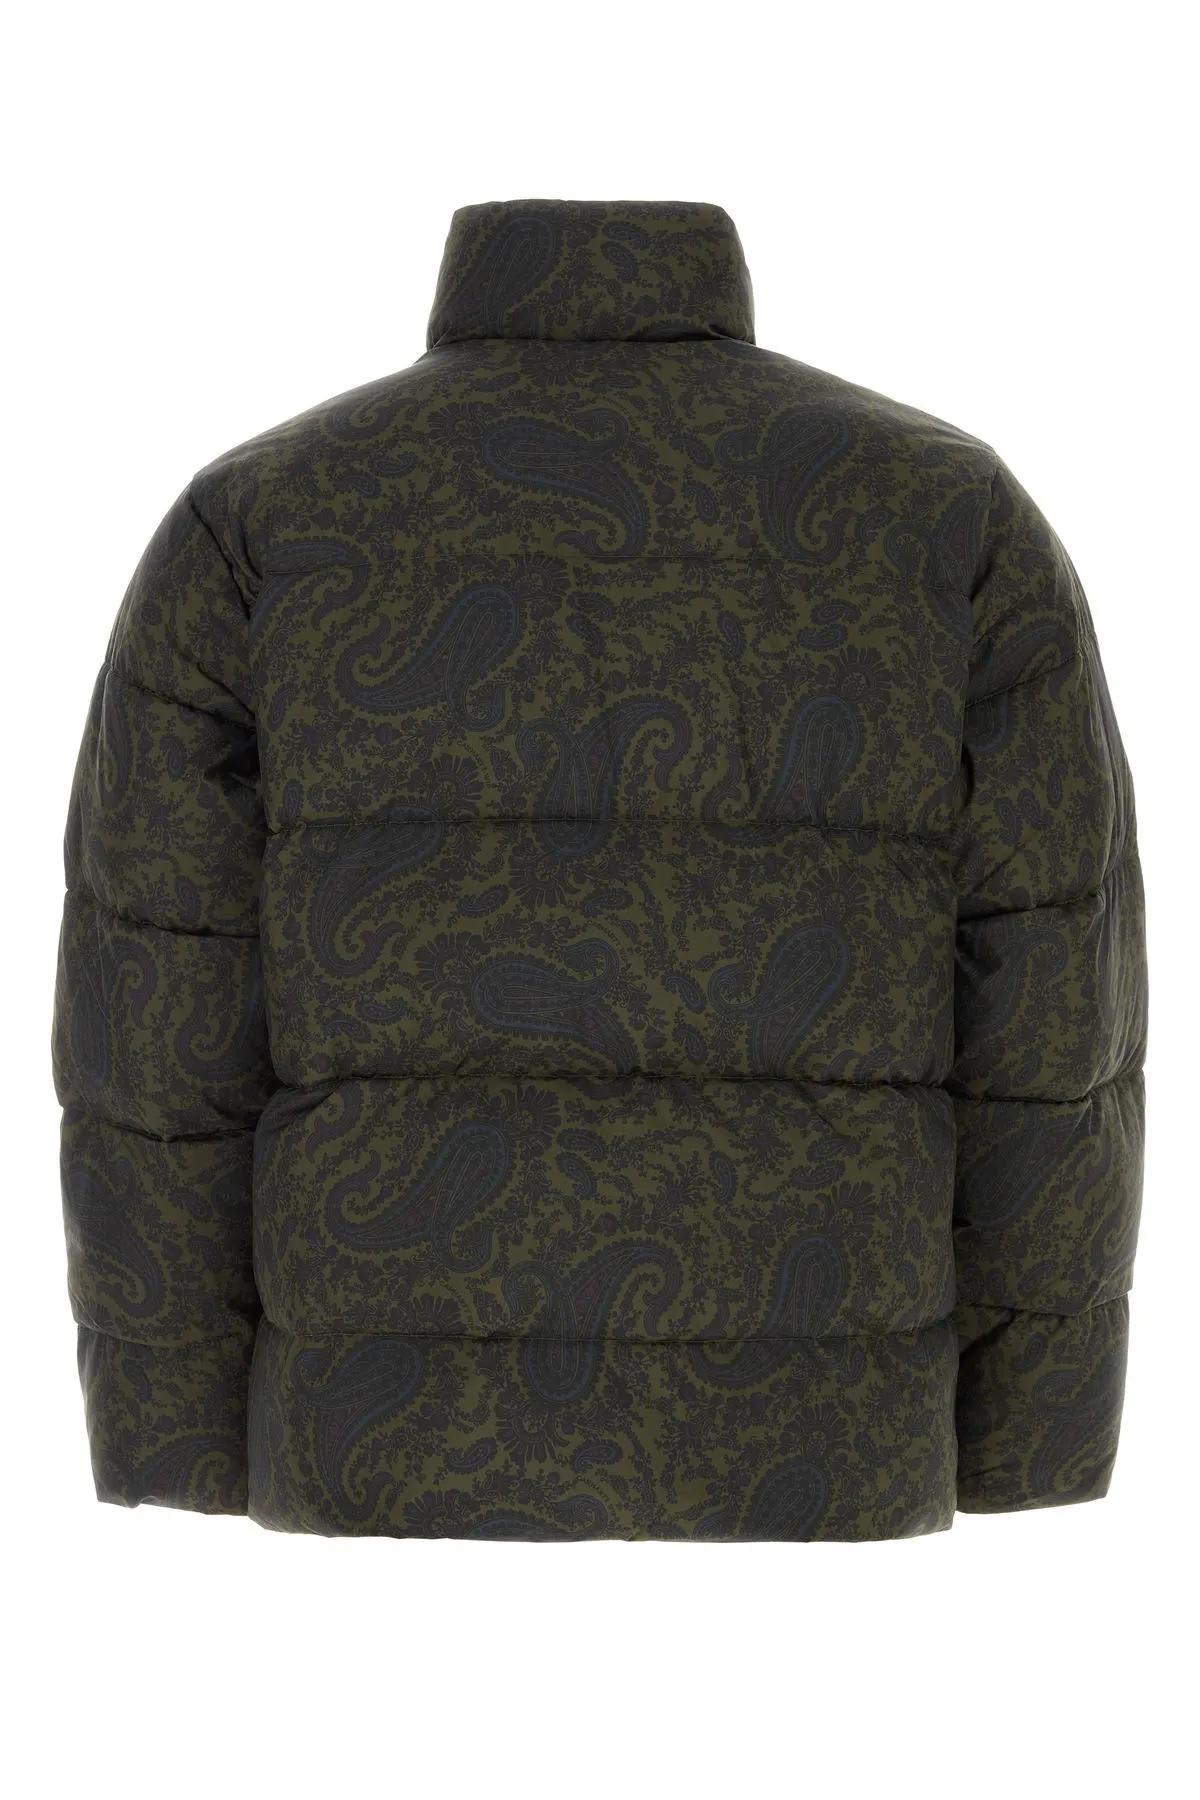 Shop Carhartt Printed Polyester Springfield Jacket In Pxx Plant Black